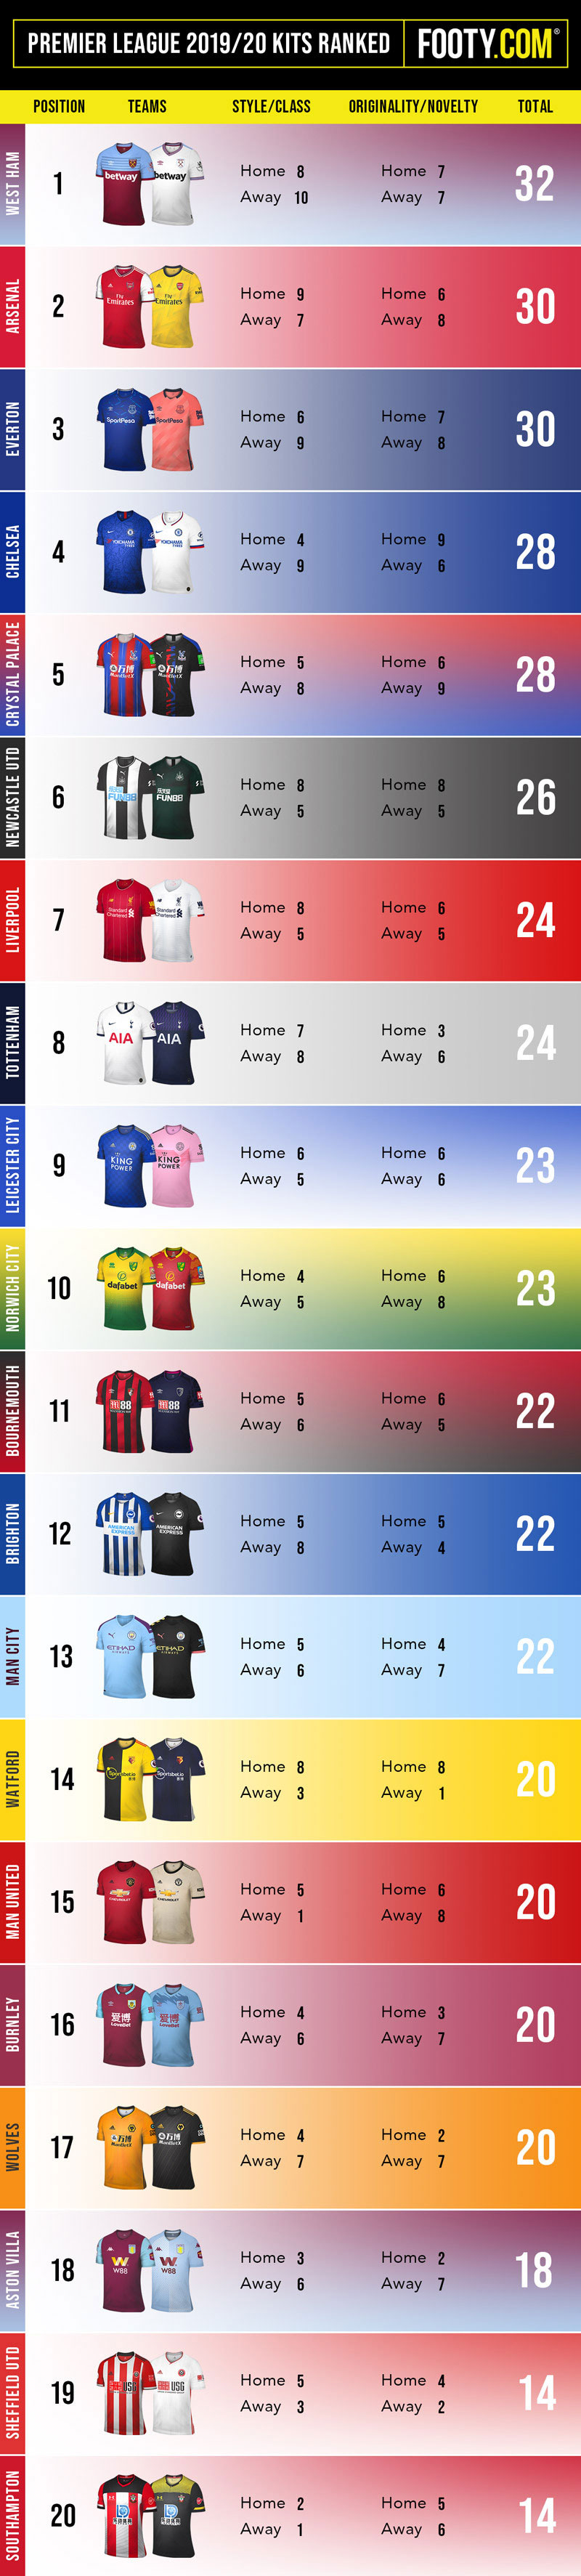 premier league ranked by kits infographic